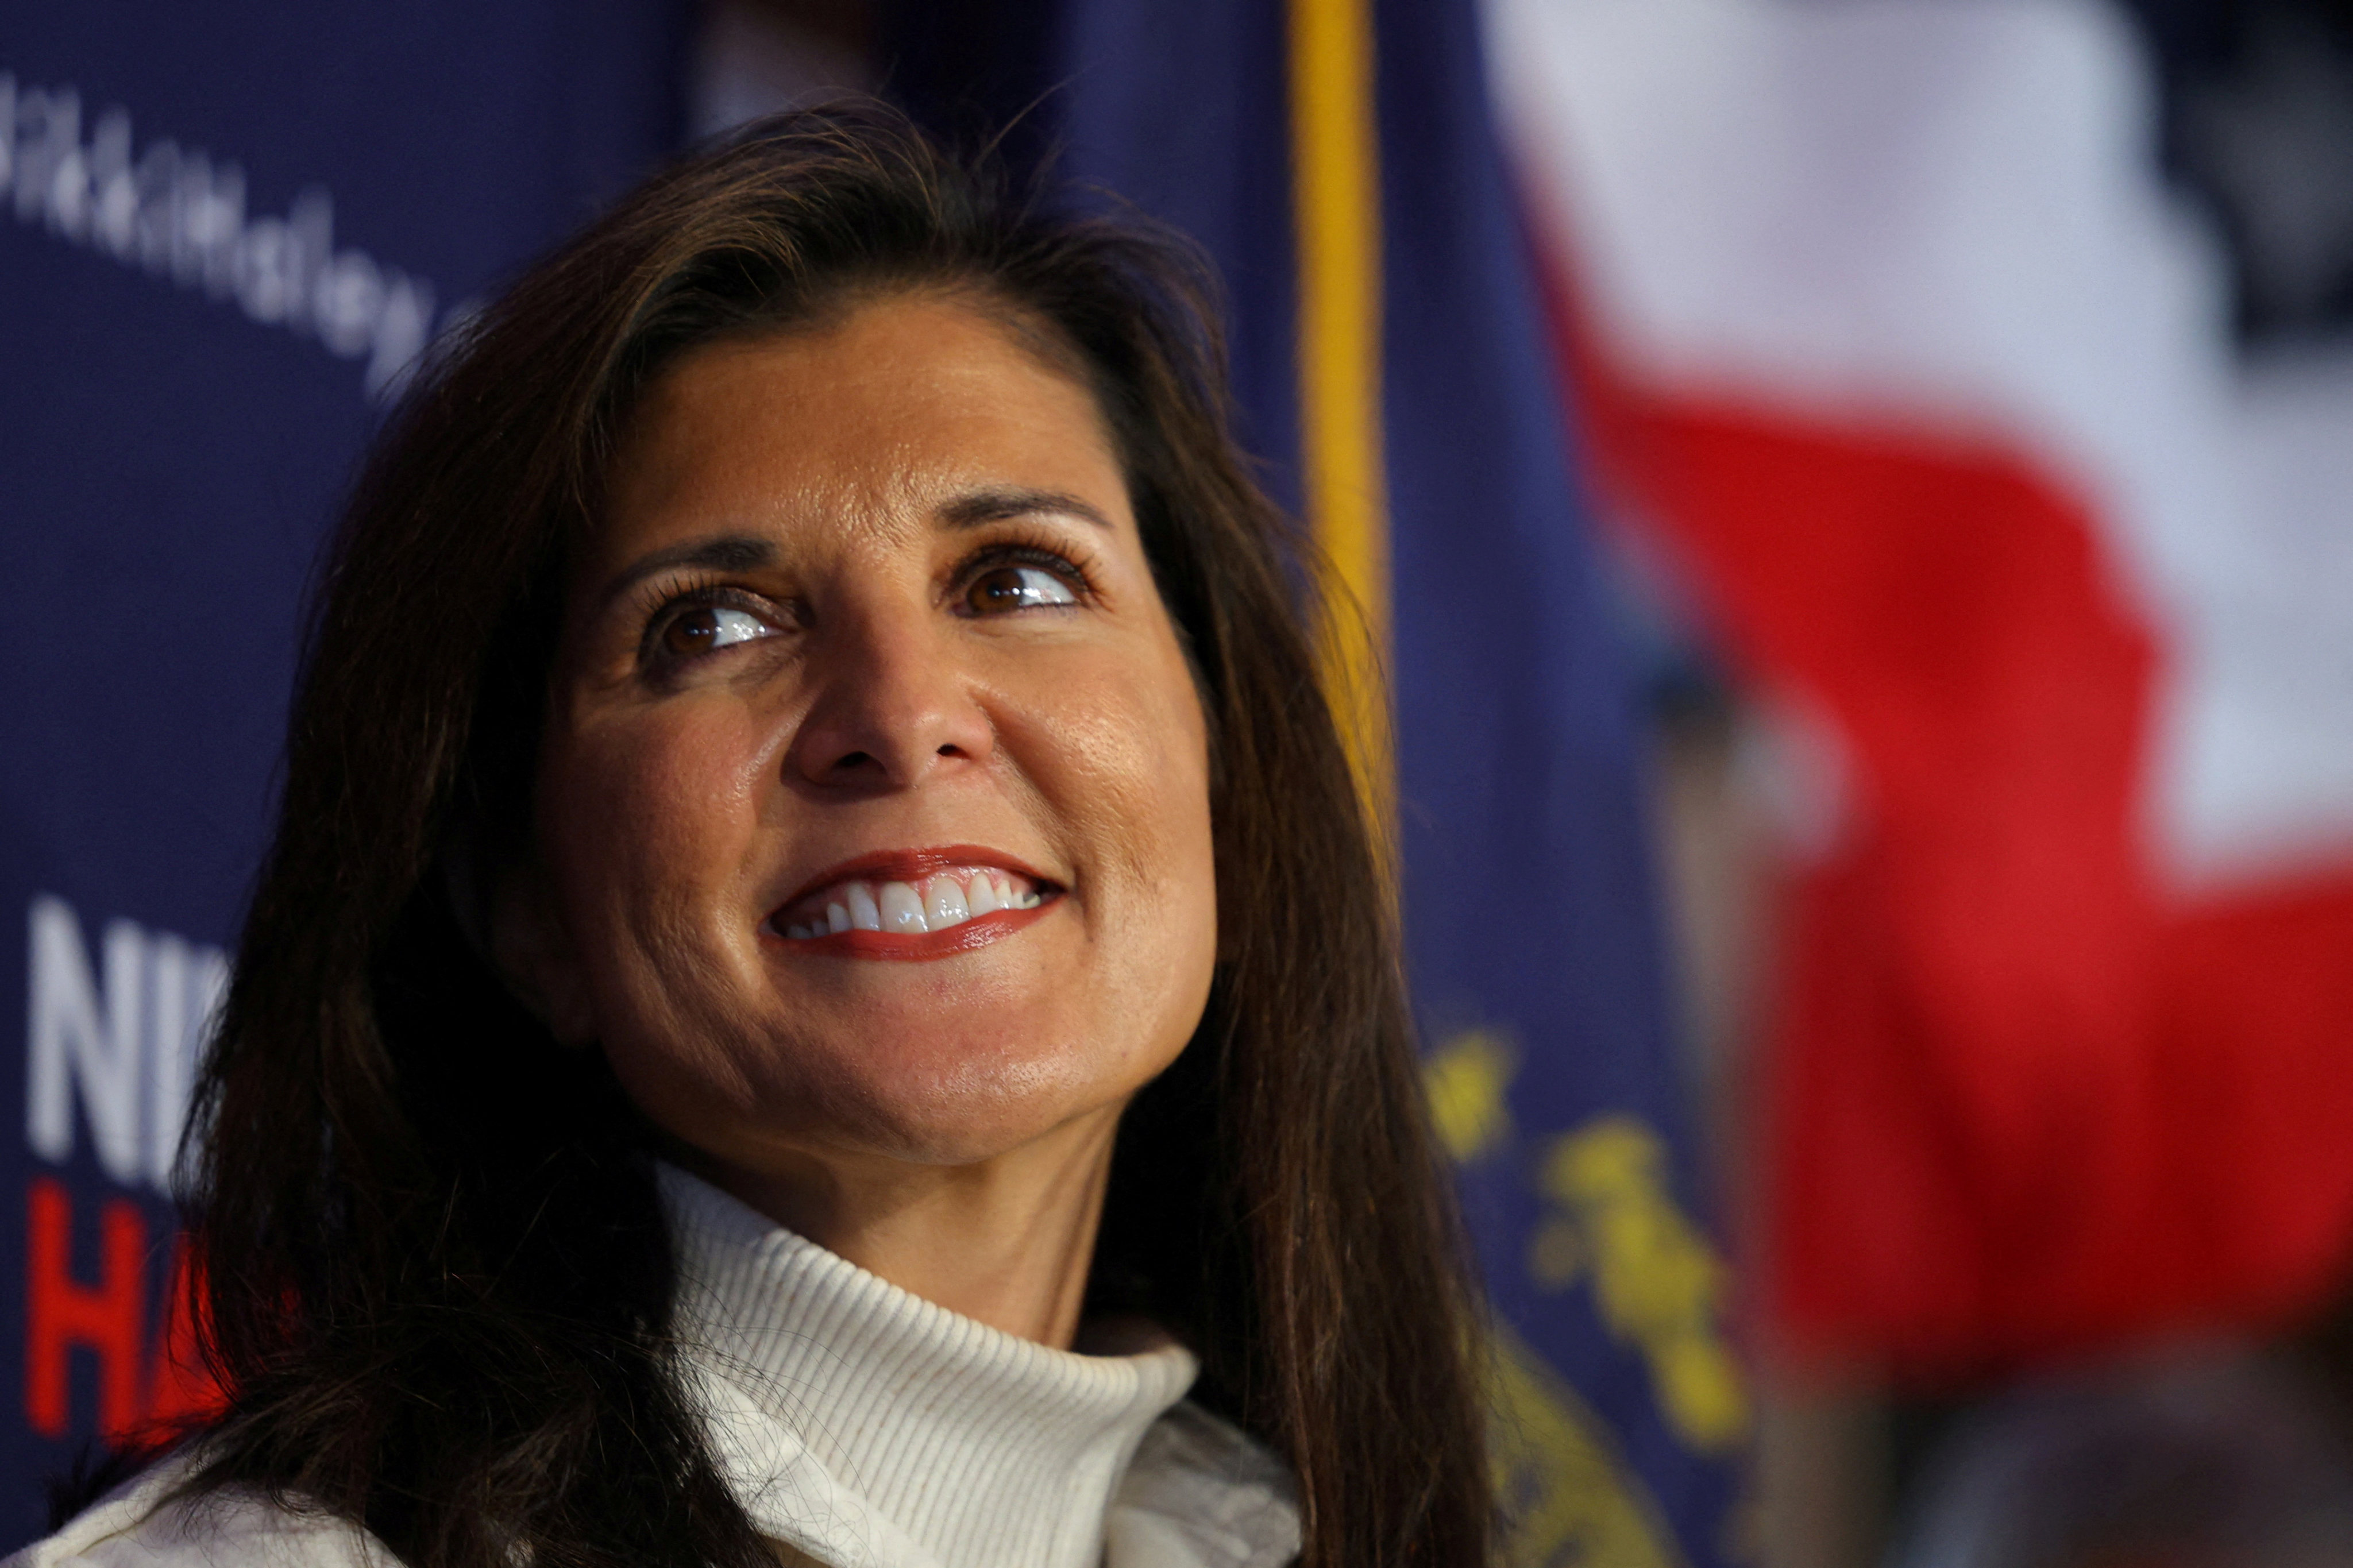 Republican presidential candidate Nikki Haley. Photo: Reuters